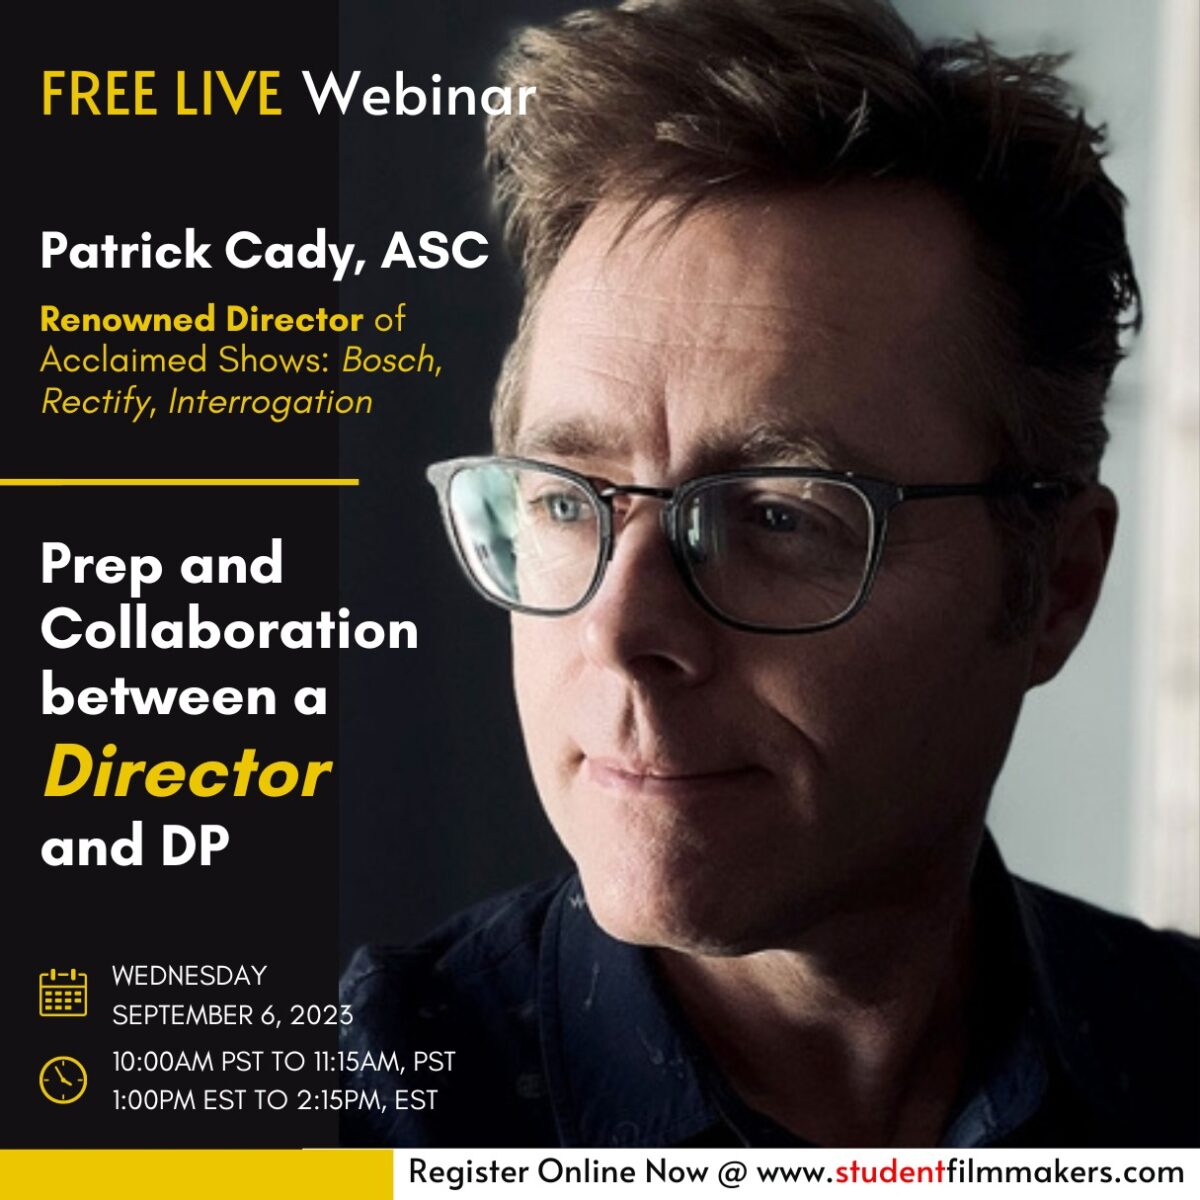 Live Webinar with Patrick Cady ASC: Prep and Collaboration between a Director and DP